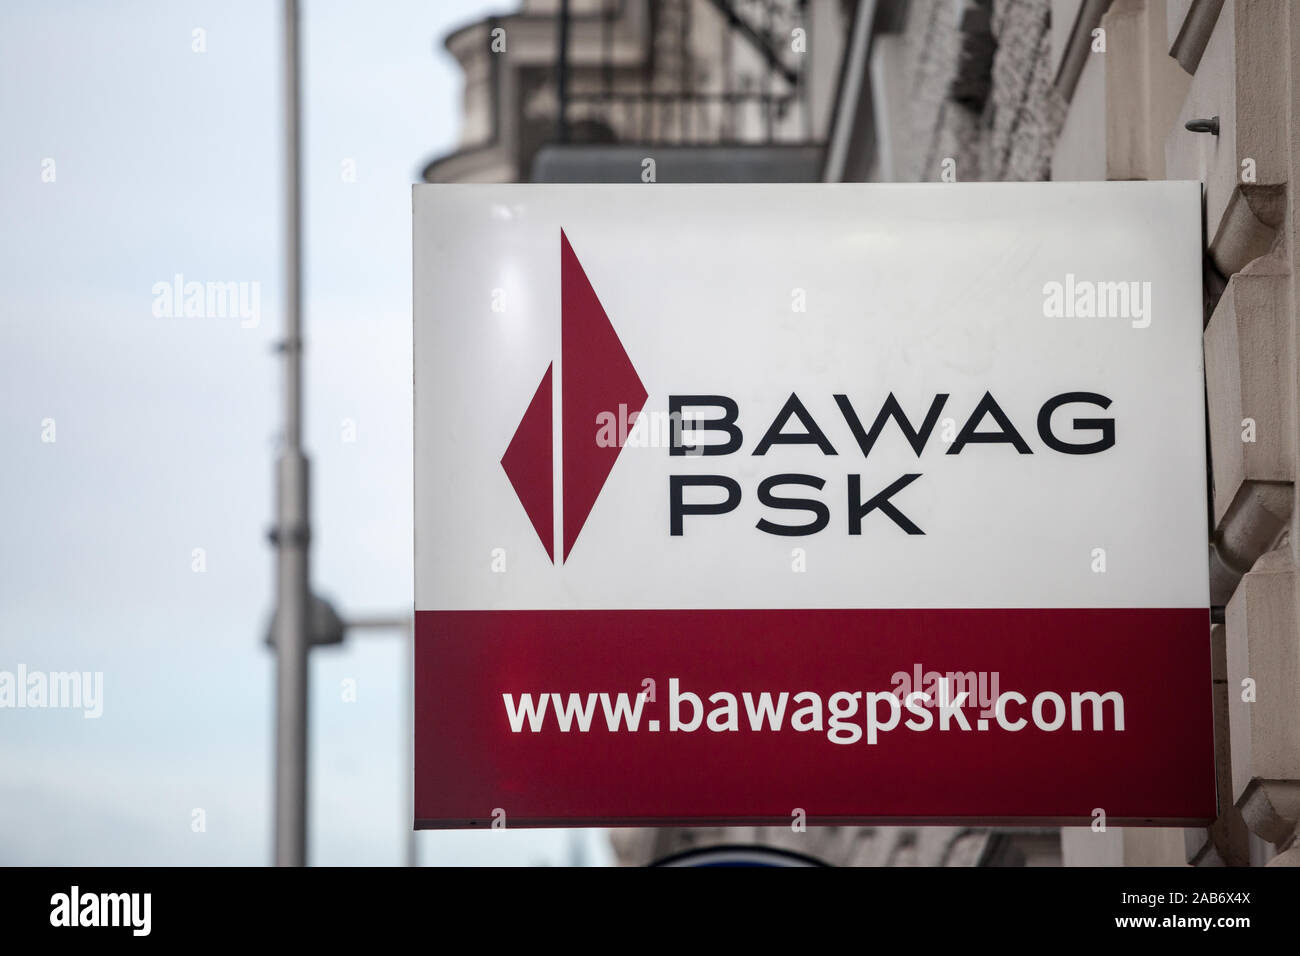 VIENNA, AUSTRIA - NOVEMBER 6, 2019: Bawag PSK logo in front of their office for Vienna. Bawag PSK is an Austrian retail and commercial bank, the fourt Stock Photo